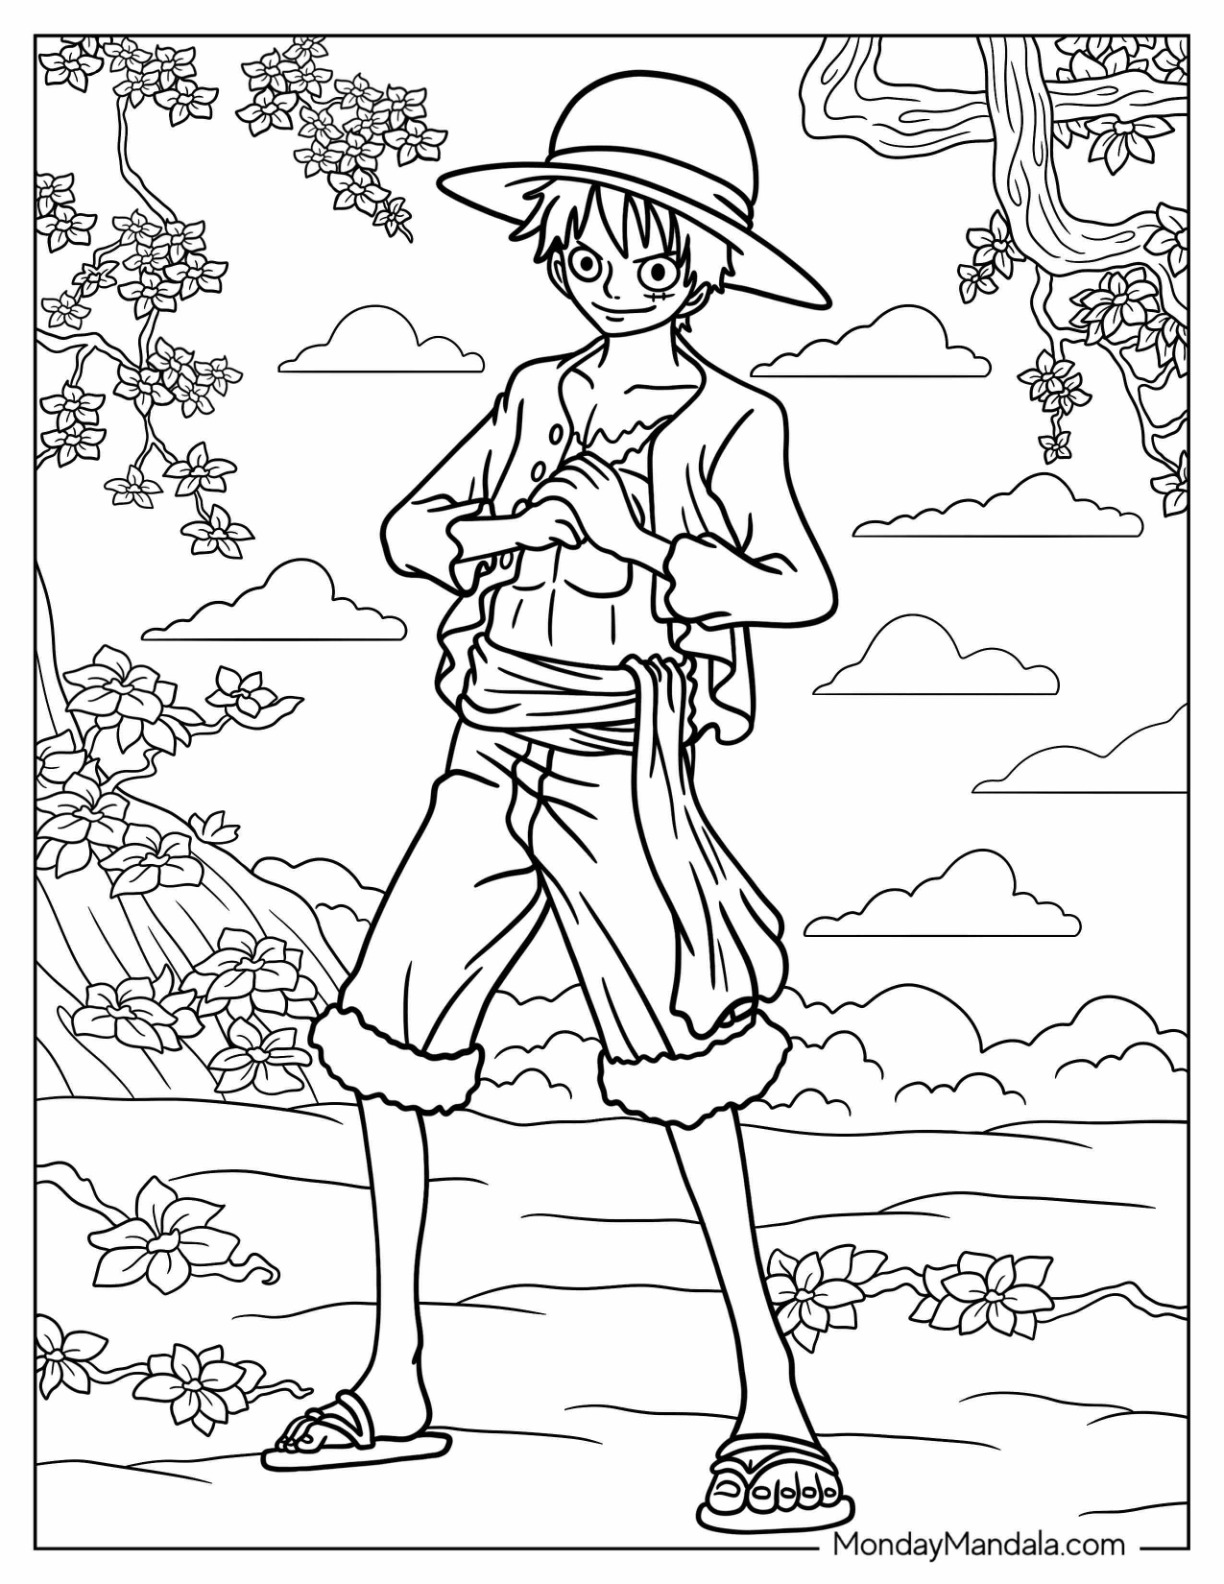 30 One Piece Coloring Pages (Free PDF ...